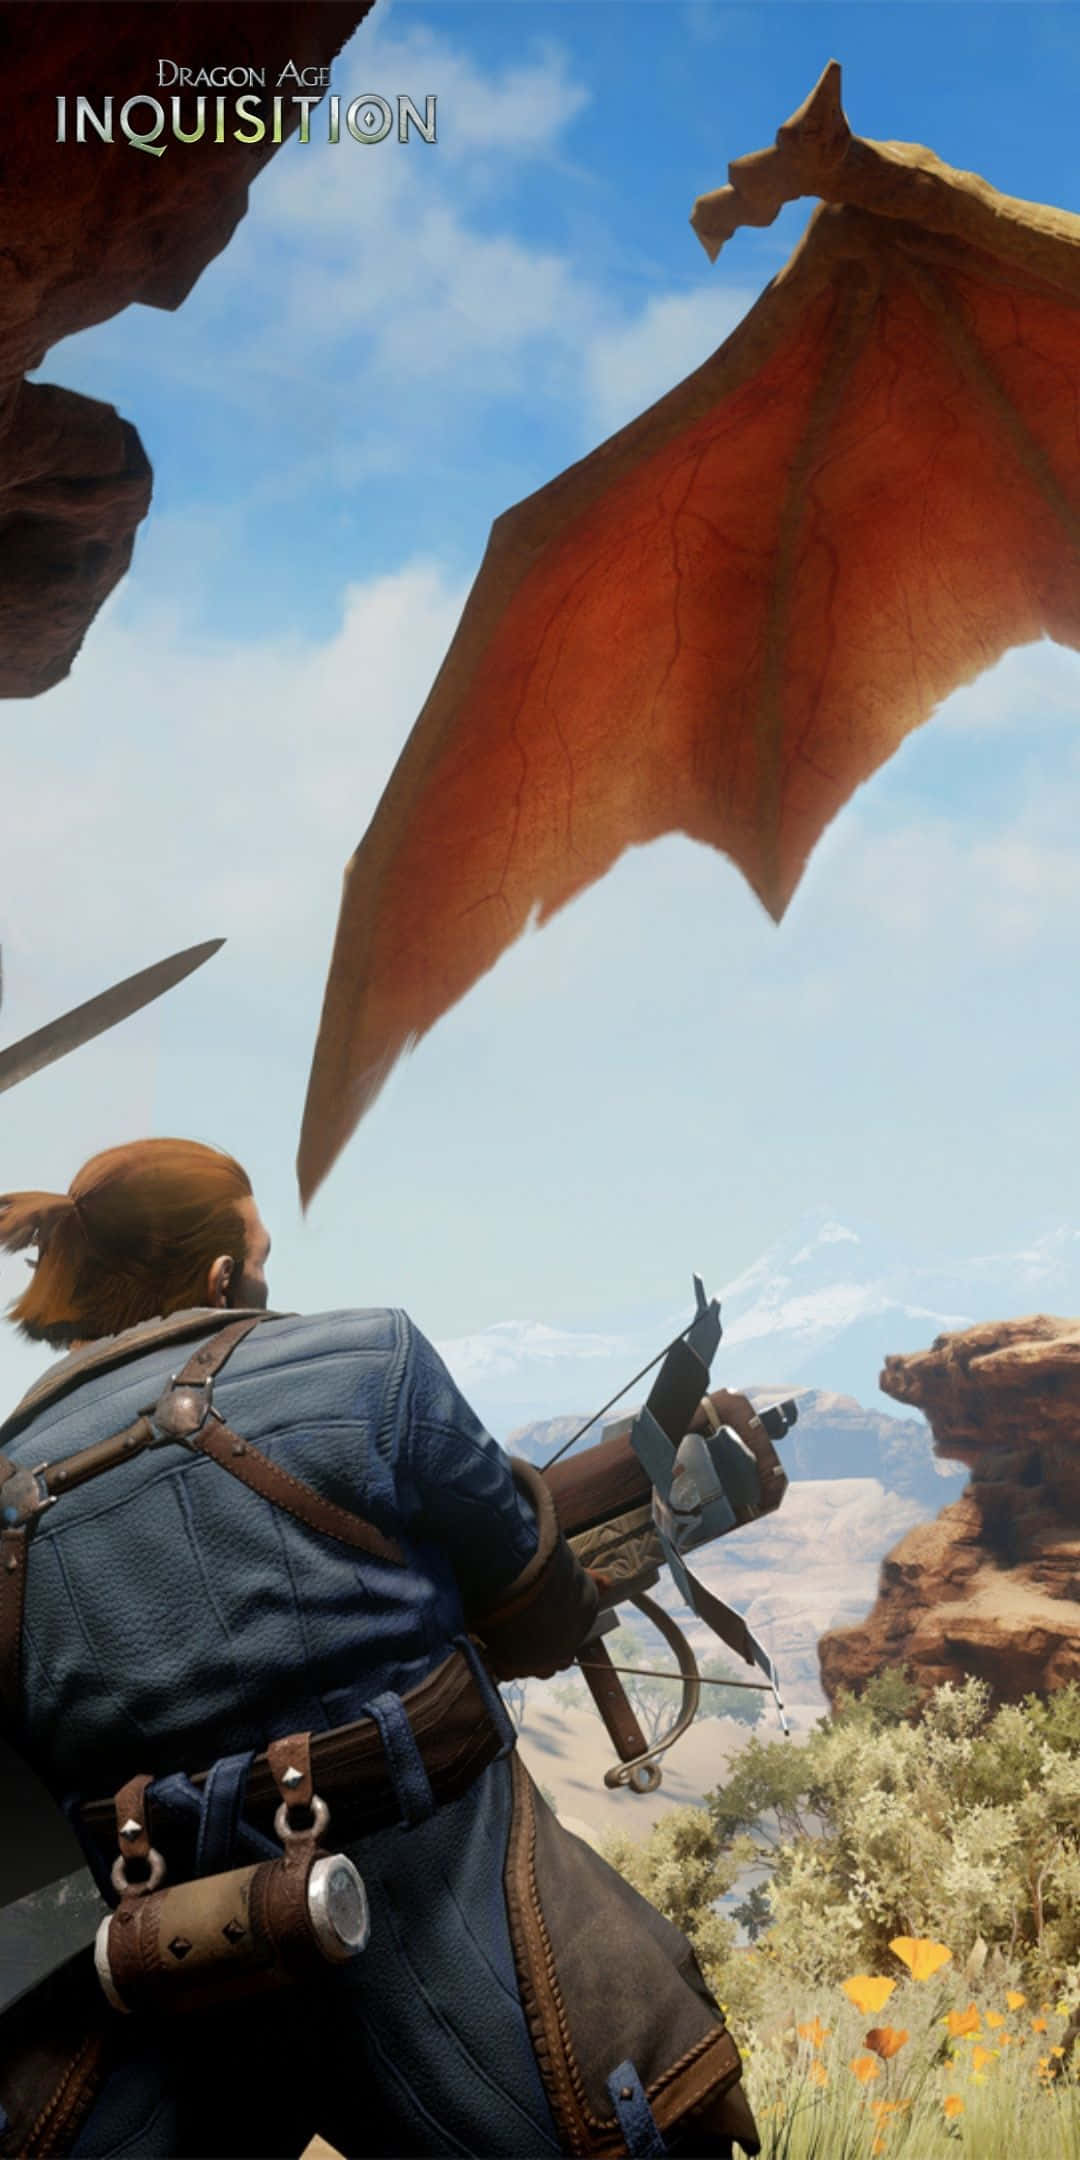 Unleash the power of the Dragon Age Inquisition with Google Pixel 3